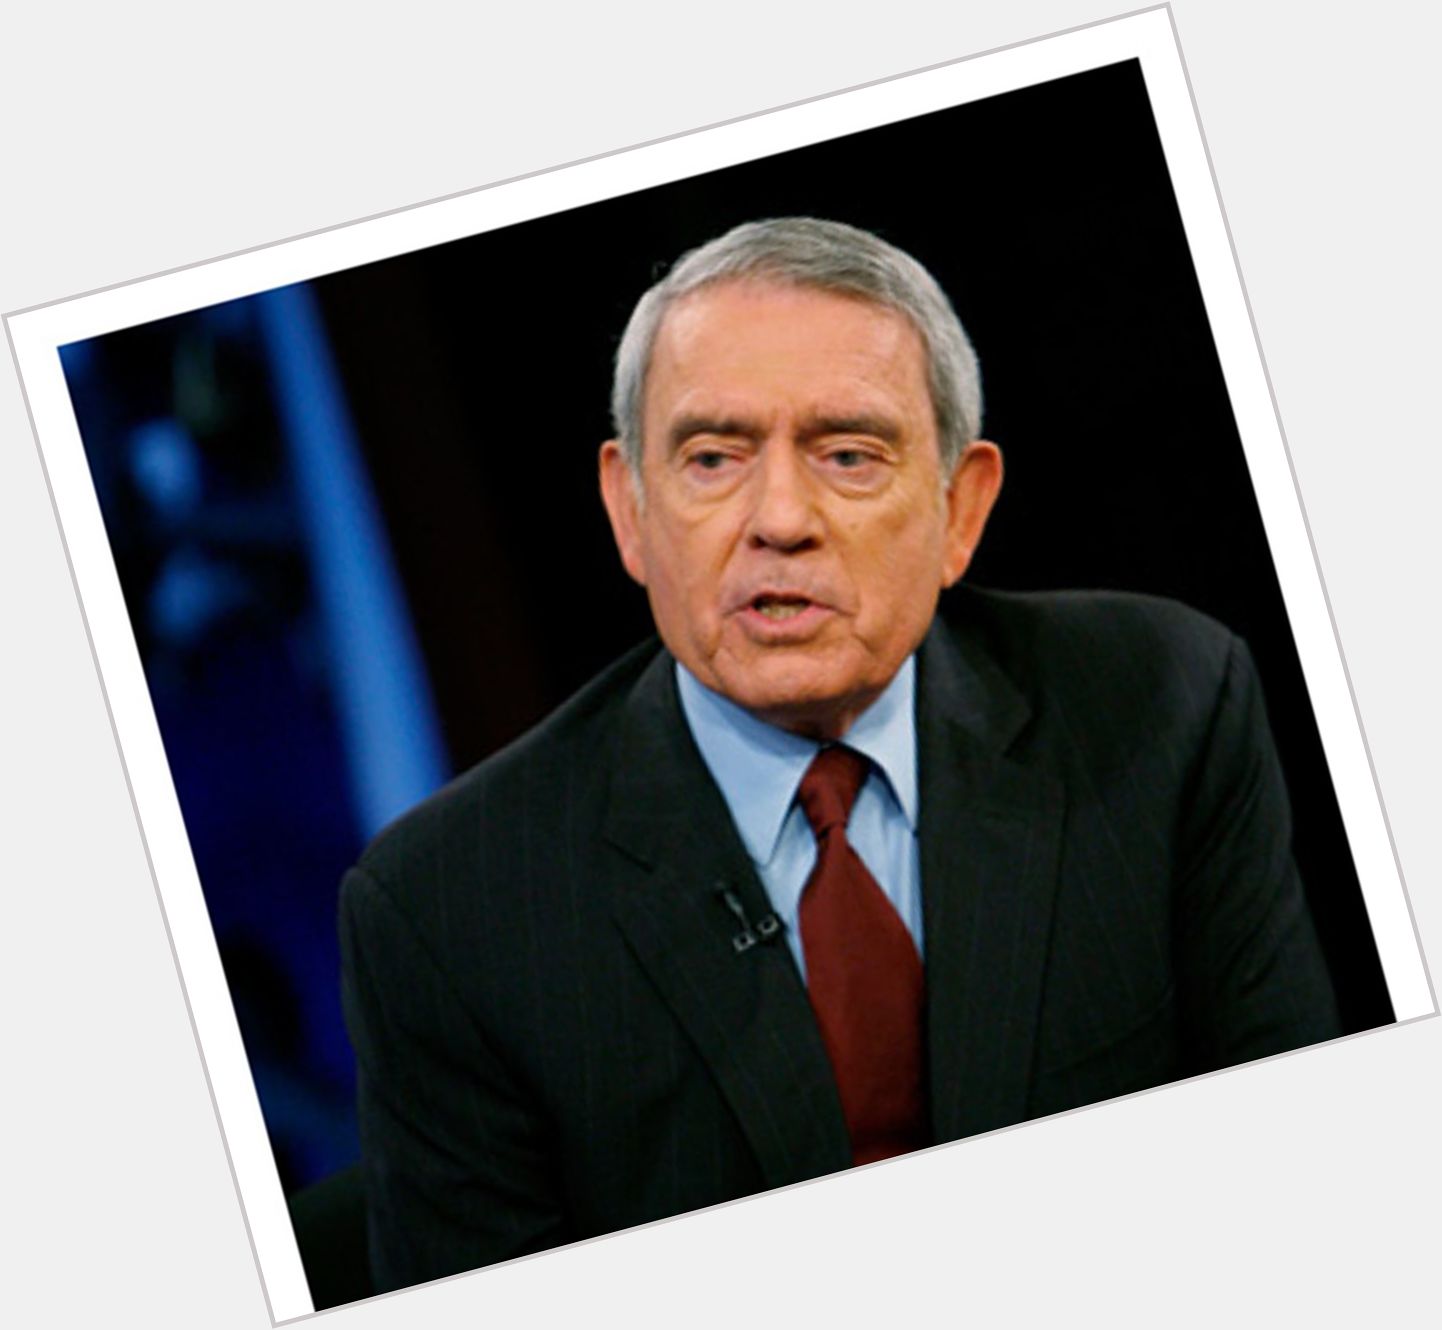 <a href="/hot-men/dan-rather/is-he-still-living-or-alive-crazy-republican">Dan Rather</a> Average body,  salt and pepper hair & hairstyles